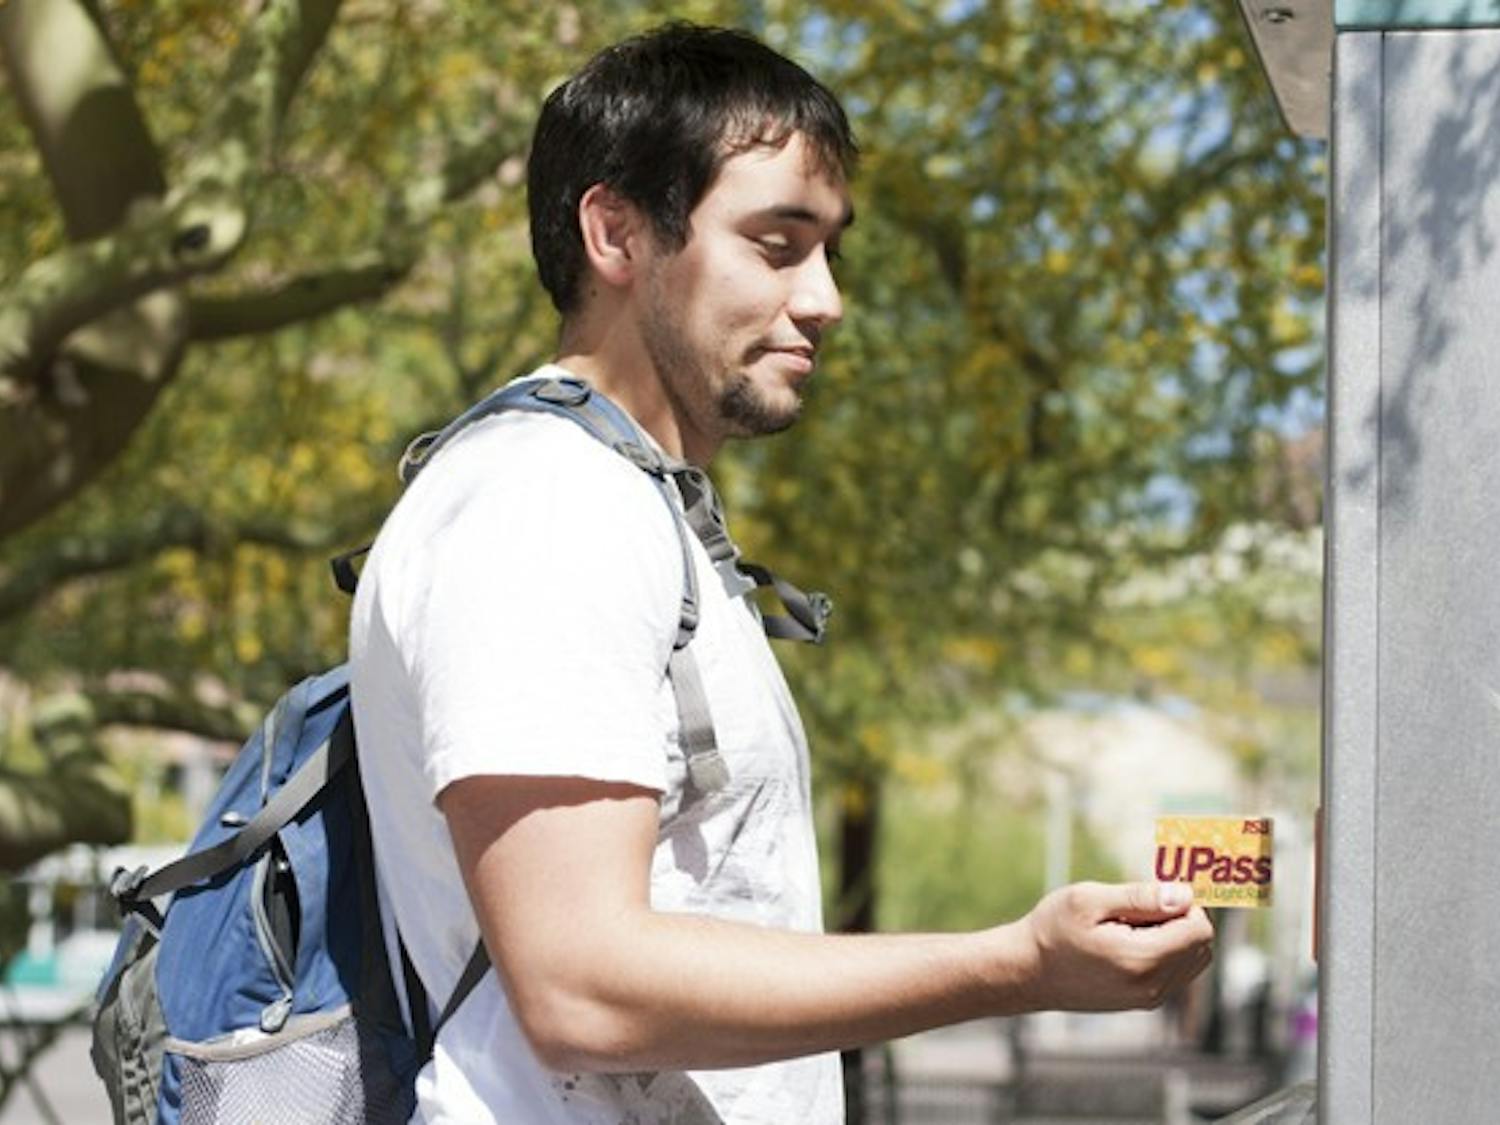 Junior Brian Jarvis, a Nutrition major, uses his U-Pass at the lightrail station on Van Buren and 1st Avenue. He says although he prefers a lower price for the pass, he knows that either way he is going to have to pay whatever amount the fee changes to. (Photo by Perla Farias)